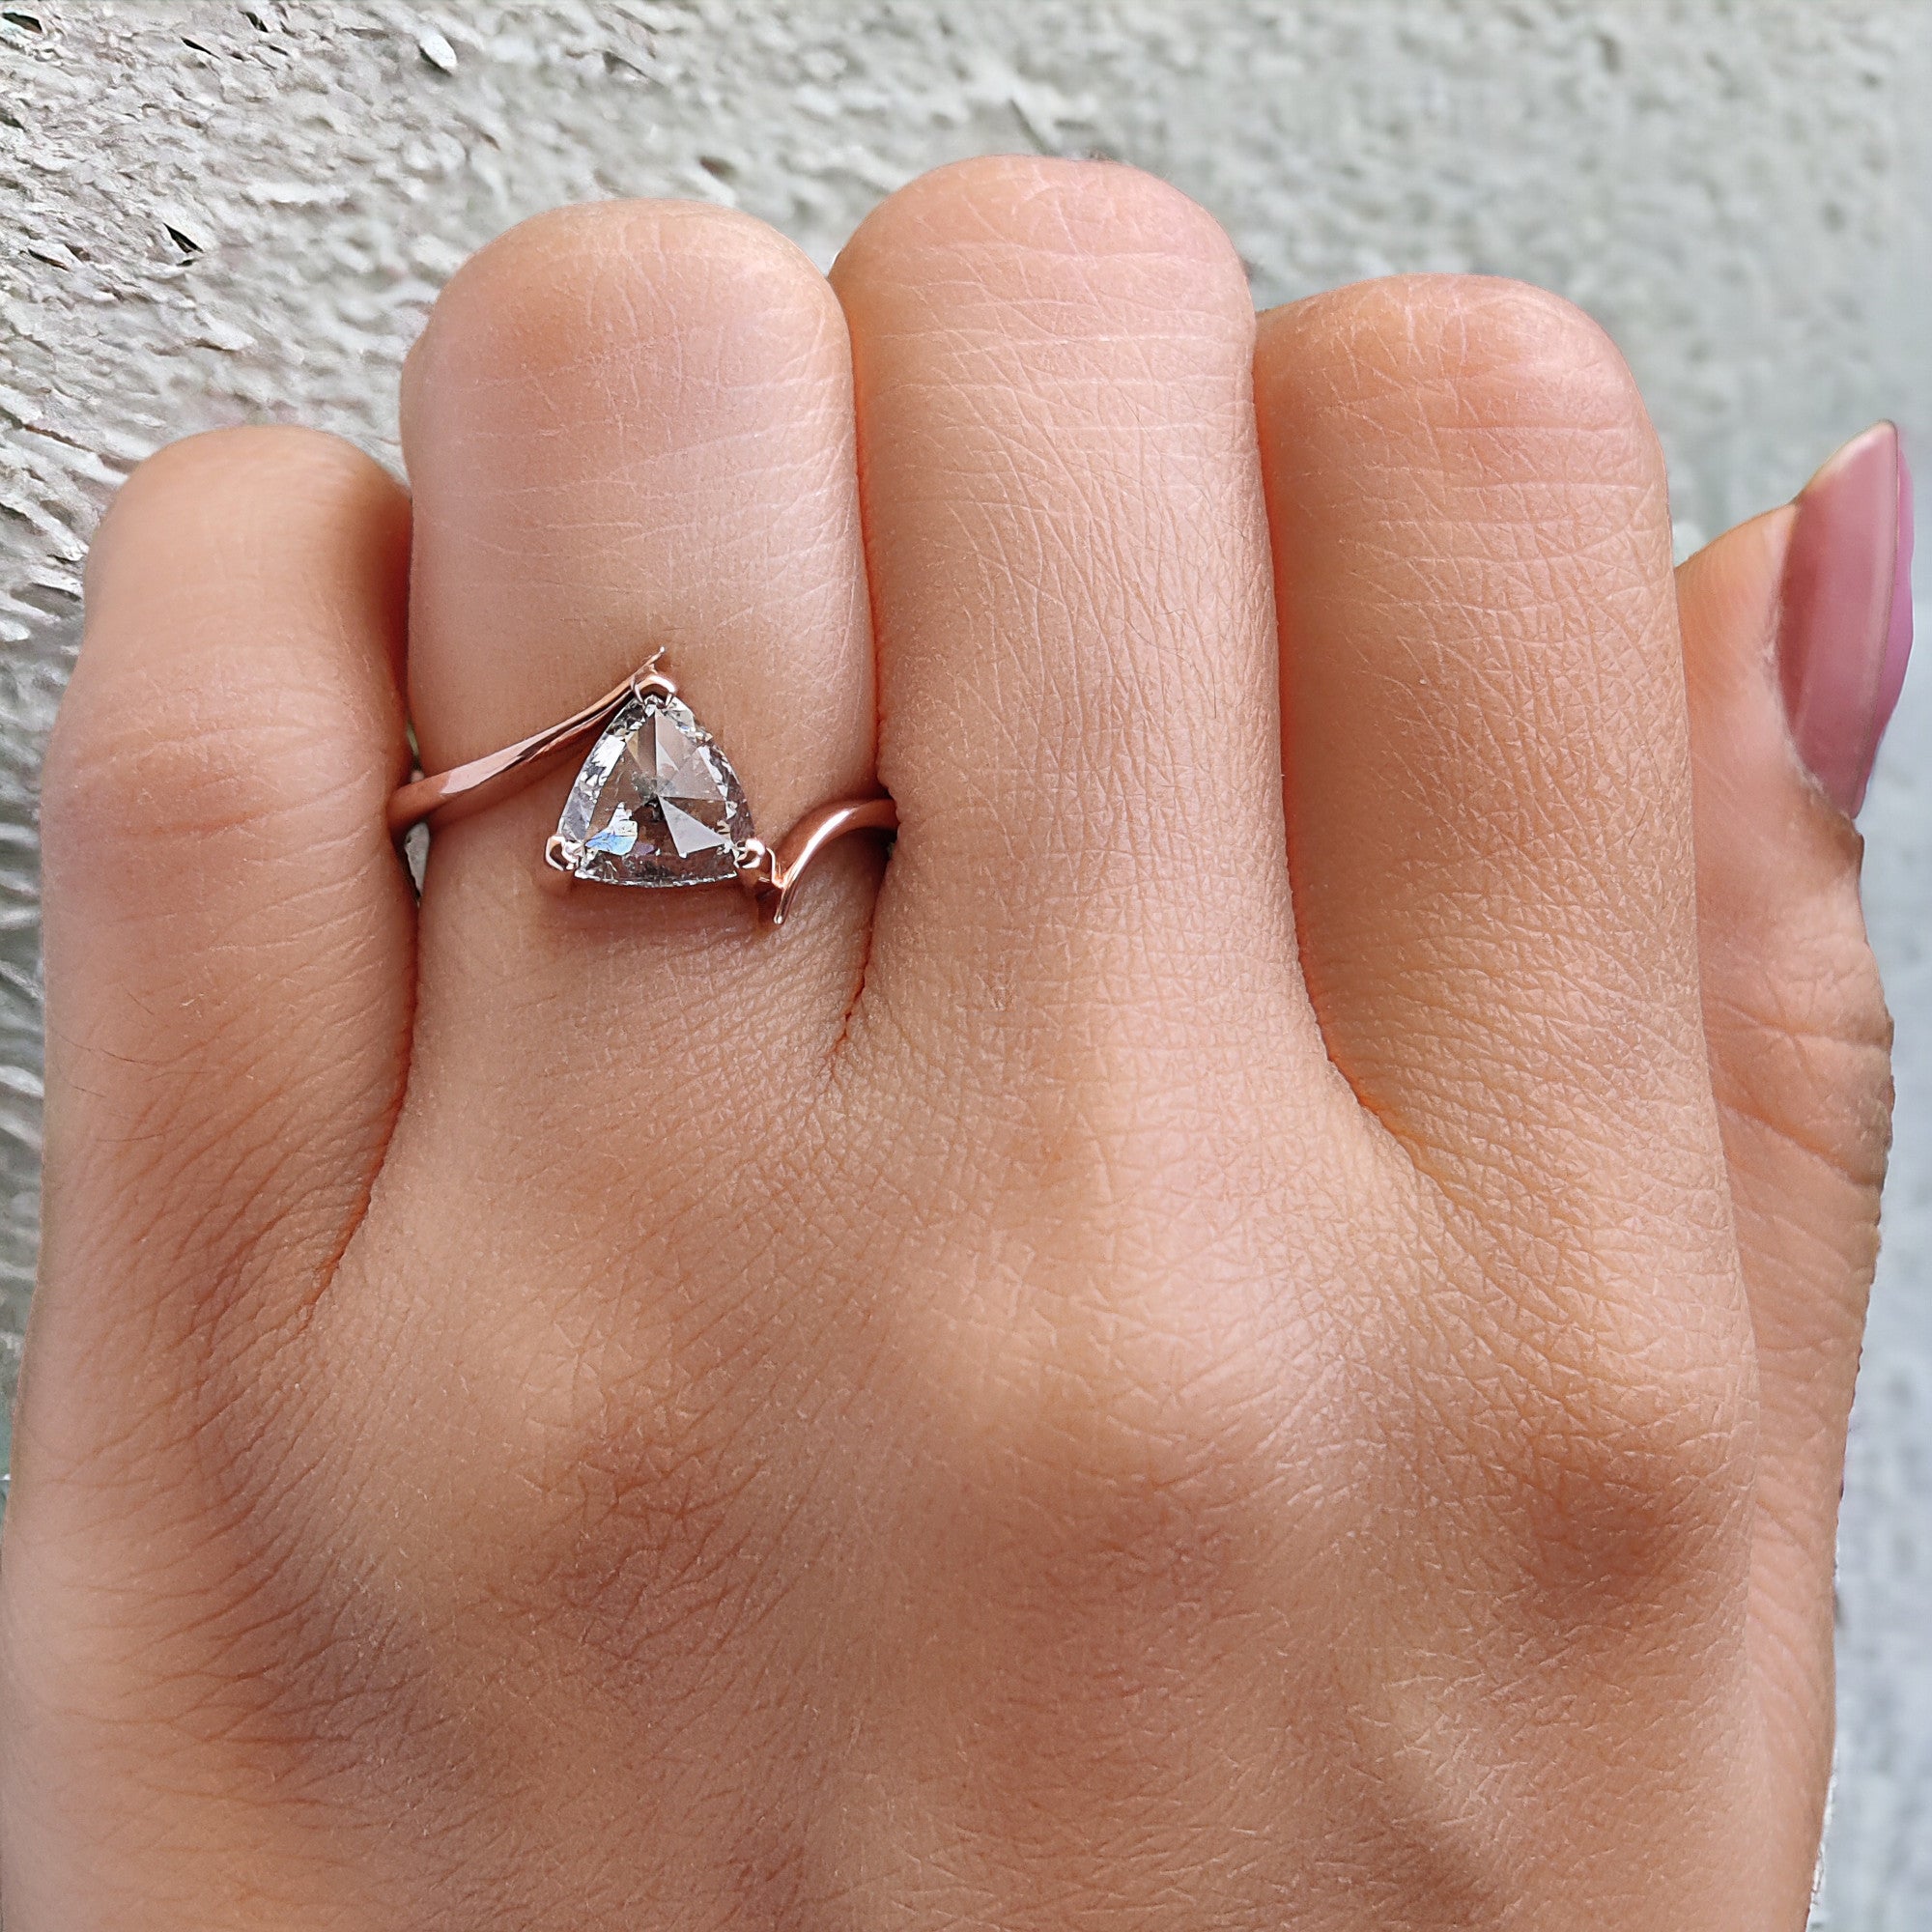 Triangle Salt And Pepper Diamond Ring 1.37 Ct 7.07 MM Triangle Diamond Ring 14K Solid Rose Gold Silver Engagement Ring Gift For Her QL2653